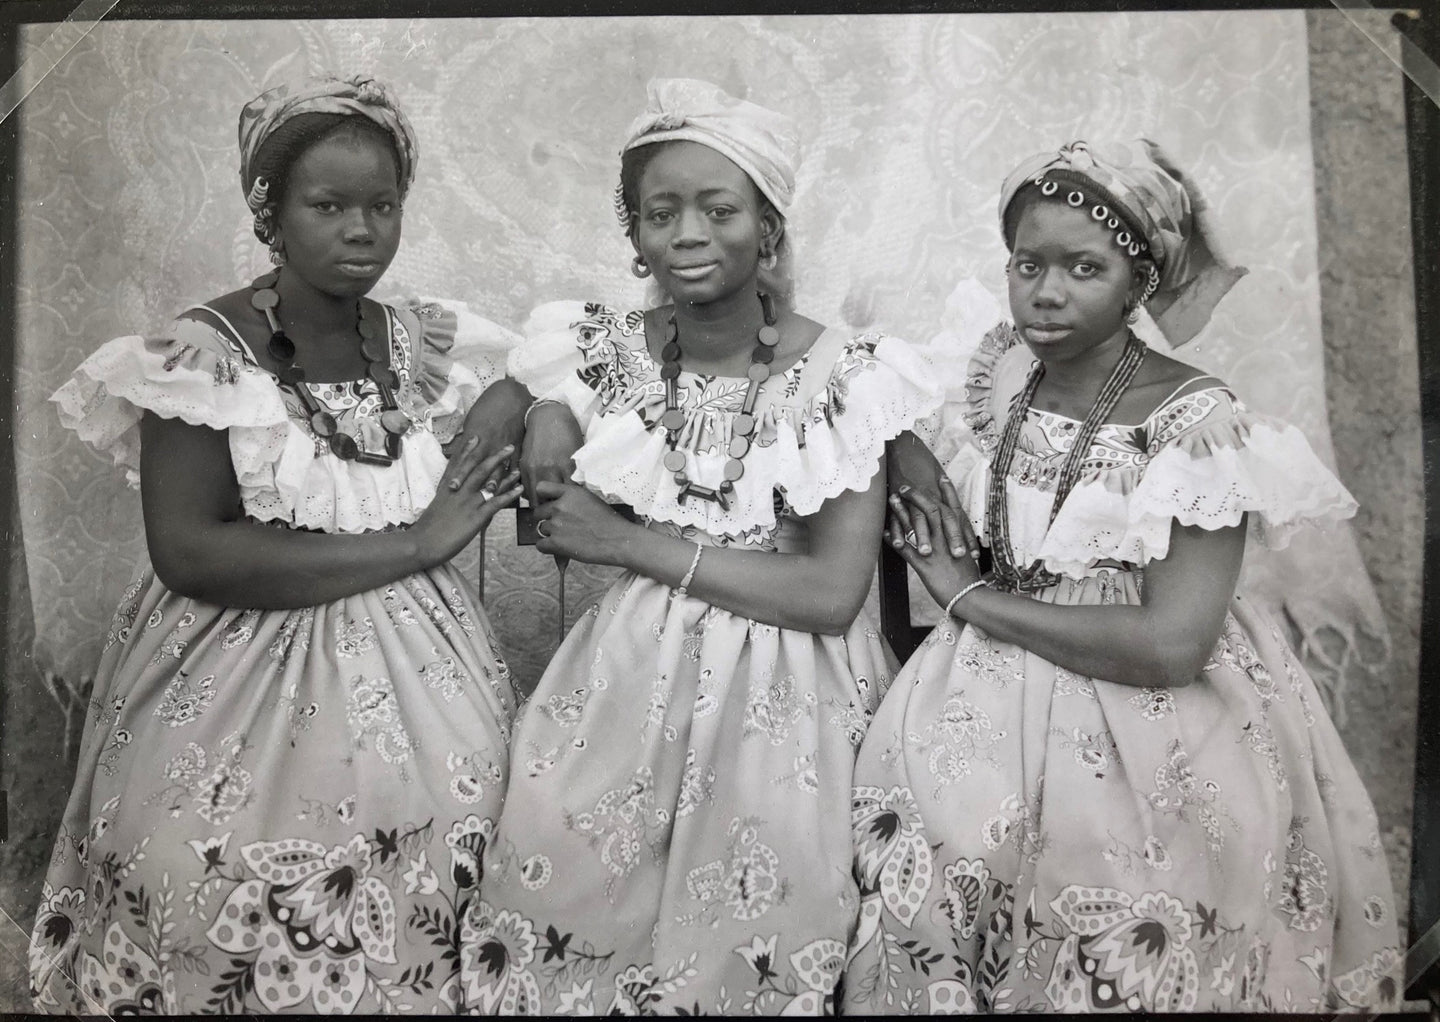 Seydou Keita - Three young women in camisoles, white dresses with flowers